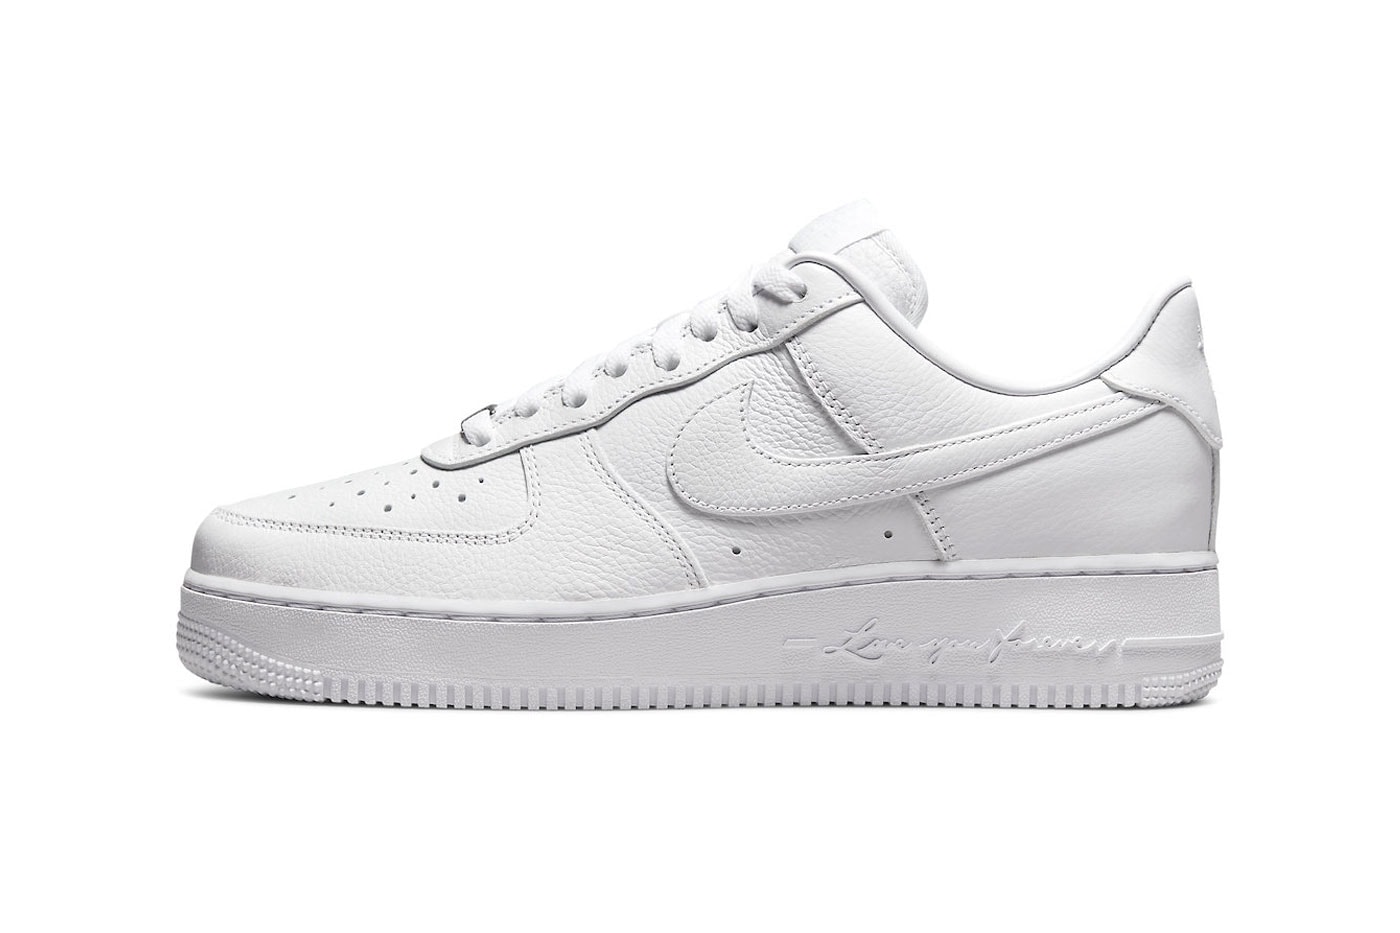 NOCTA x Nike Air Force 1「Certified Lover Boy」官方圖輯正式亮相